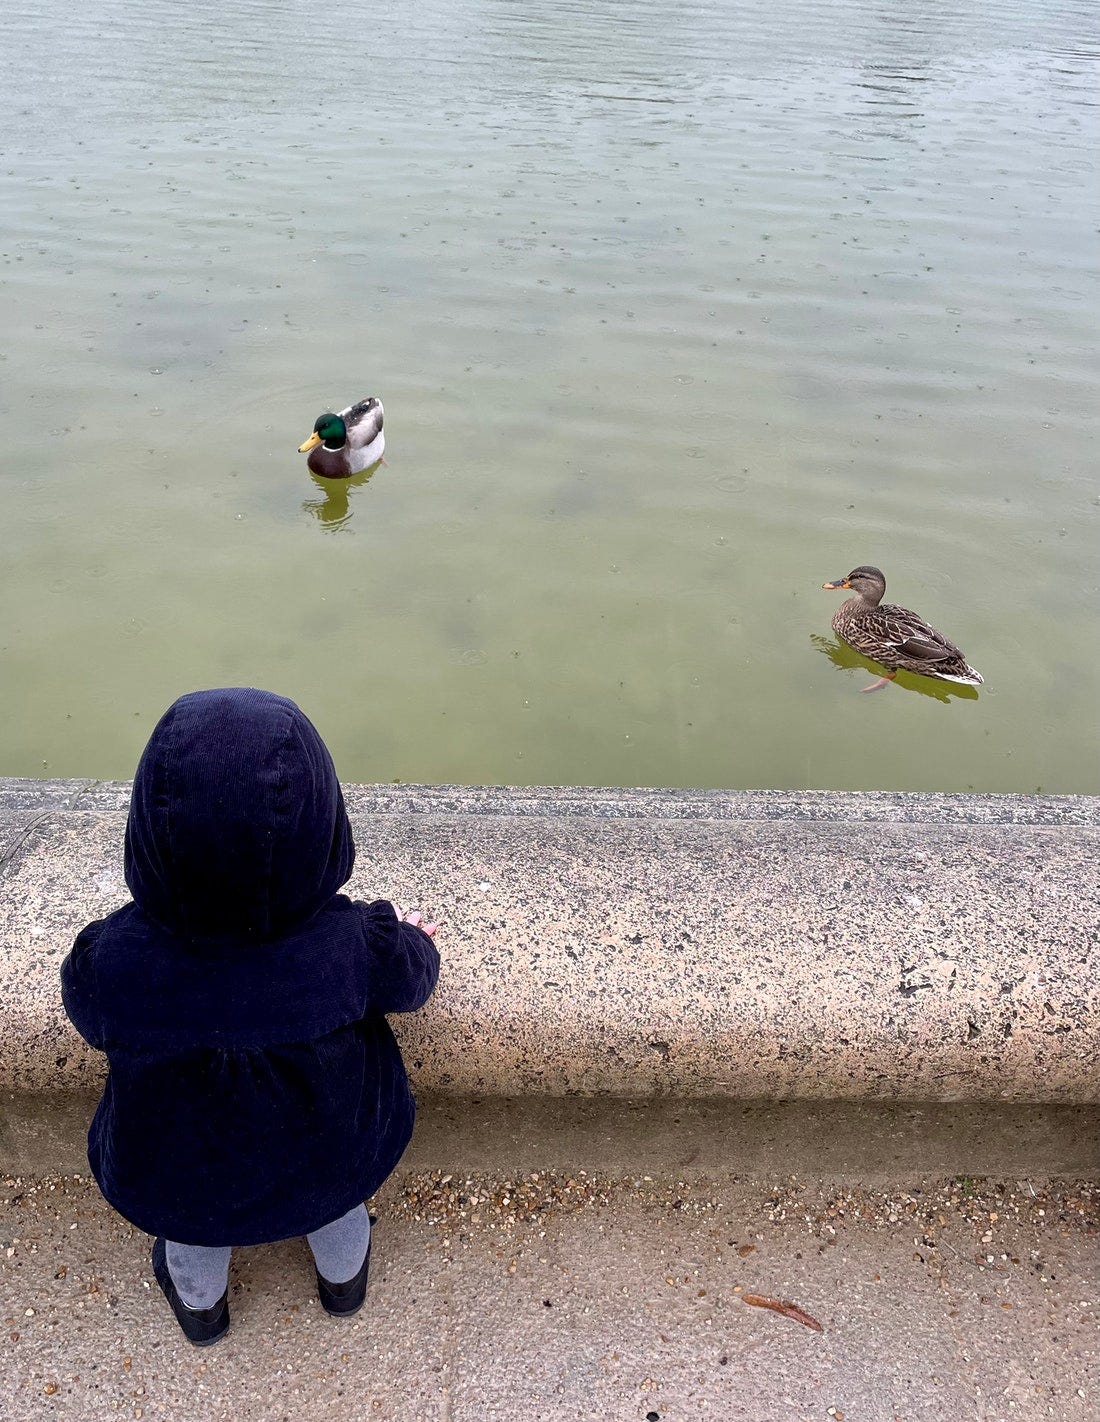 A child looking at a duck

Description automatically generated with low confidence